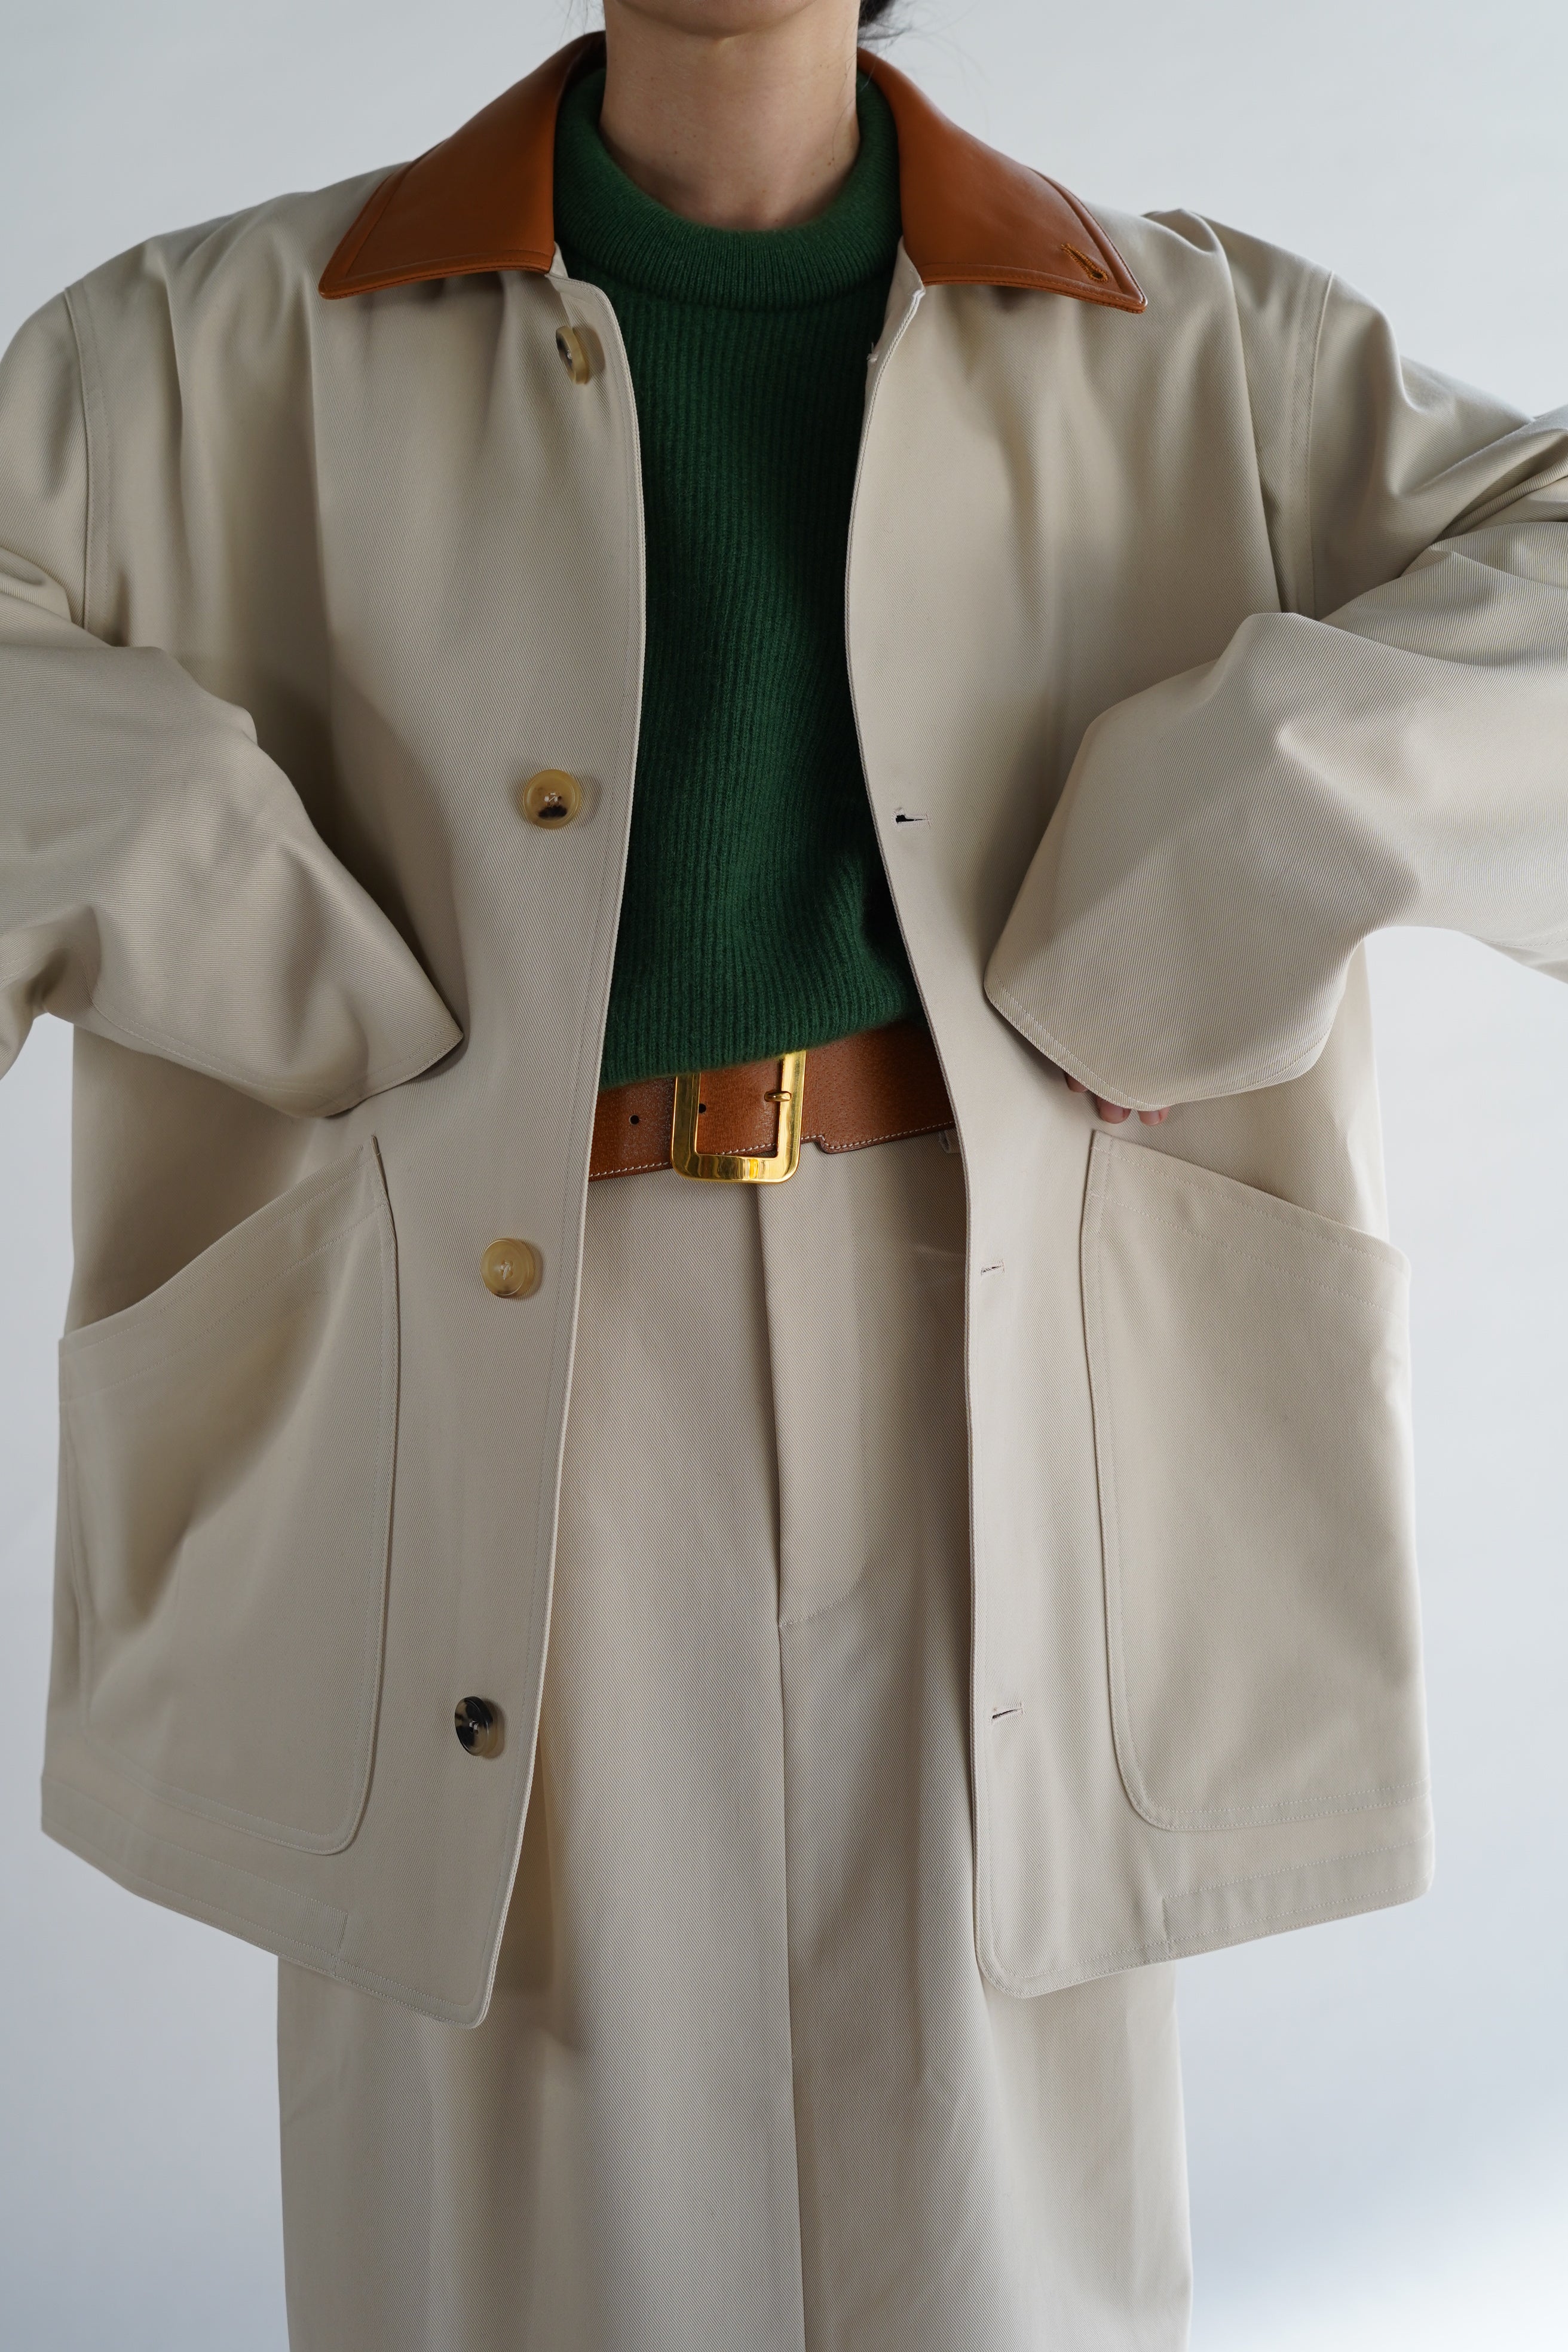 Cristaseya クリスタセヤ OVERSIZED COTTON TRENCH WITH LEATHER PATCH